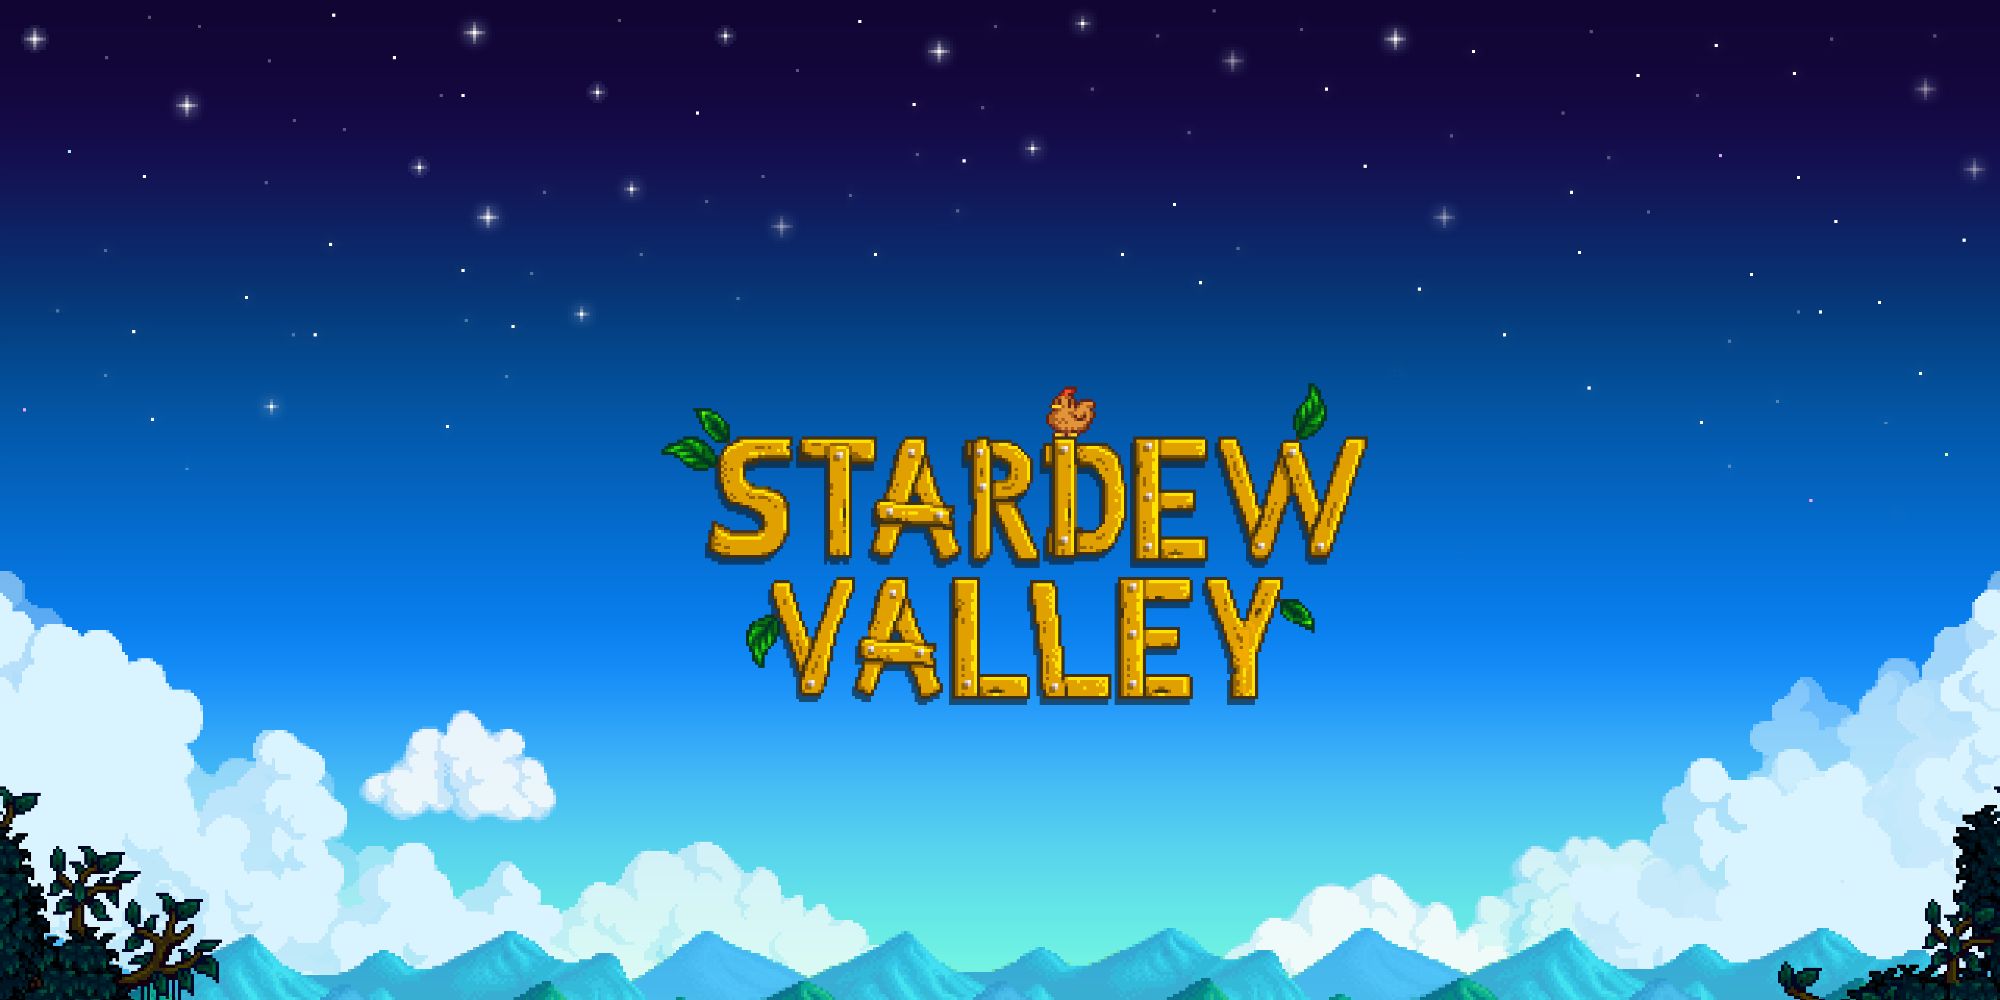 Official Stardew Valley Poster, with the title of the game floating in a blue sky with clouds and mountains at the bottom